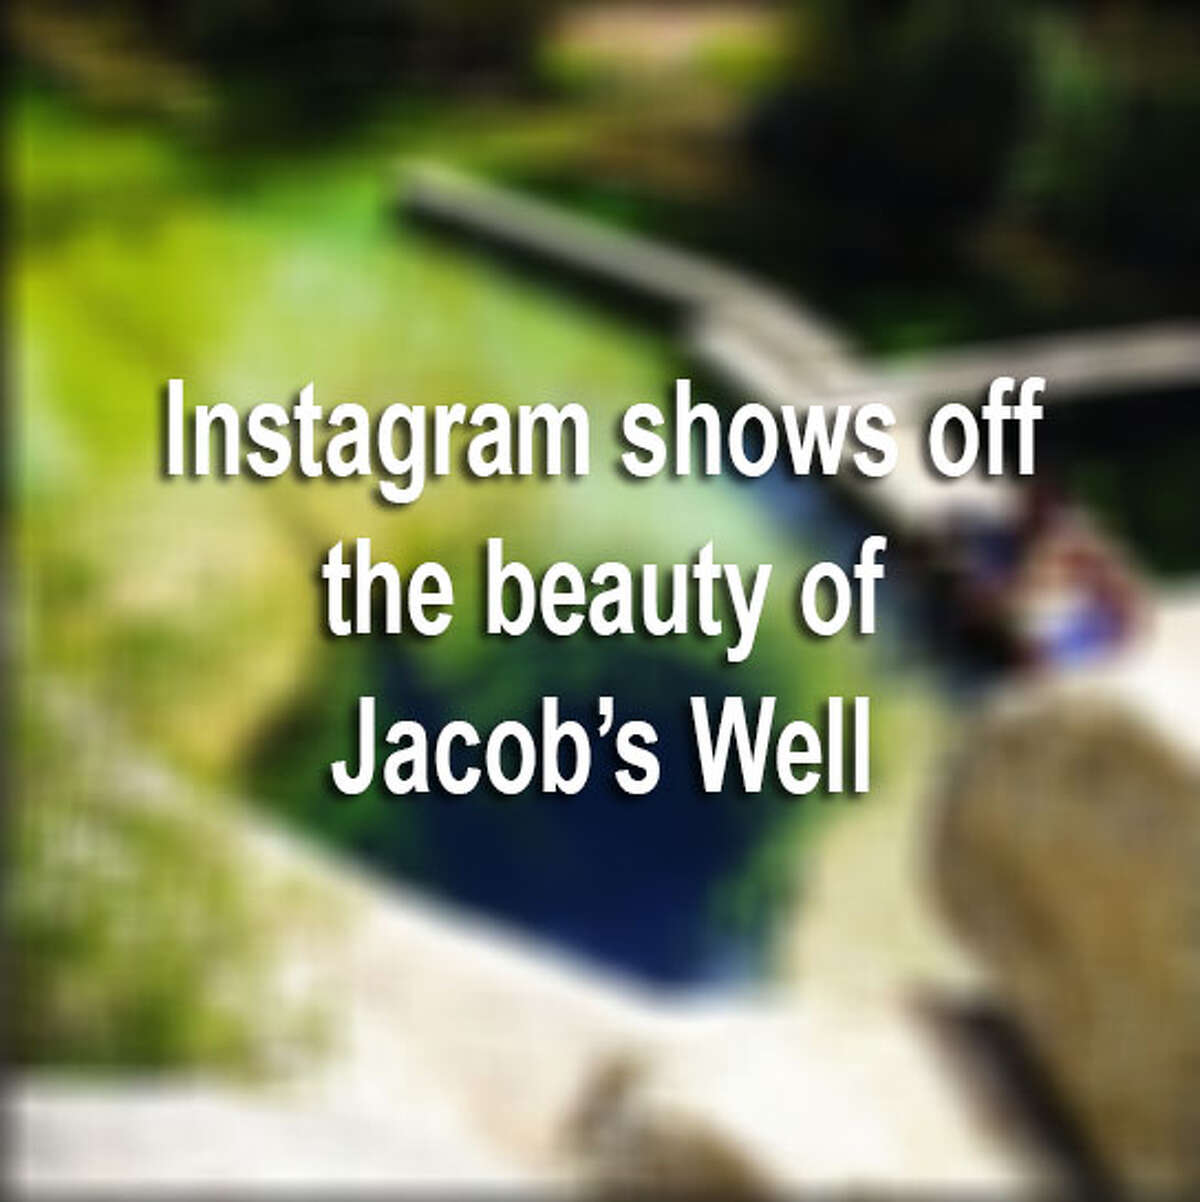 Check out some photos shared on Instagram from Jacob's Well.